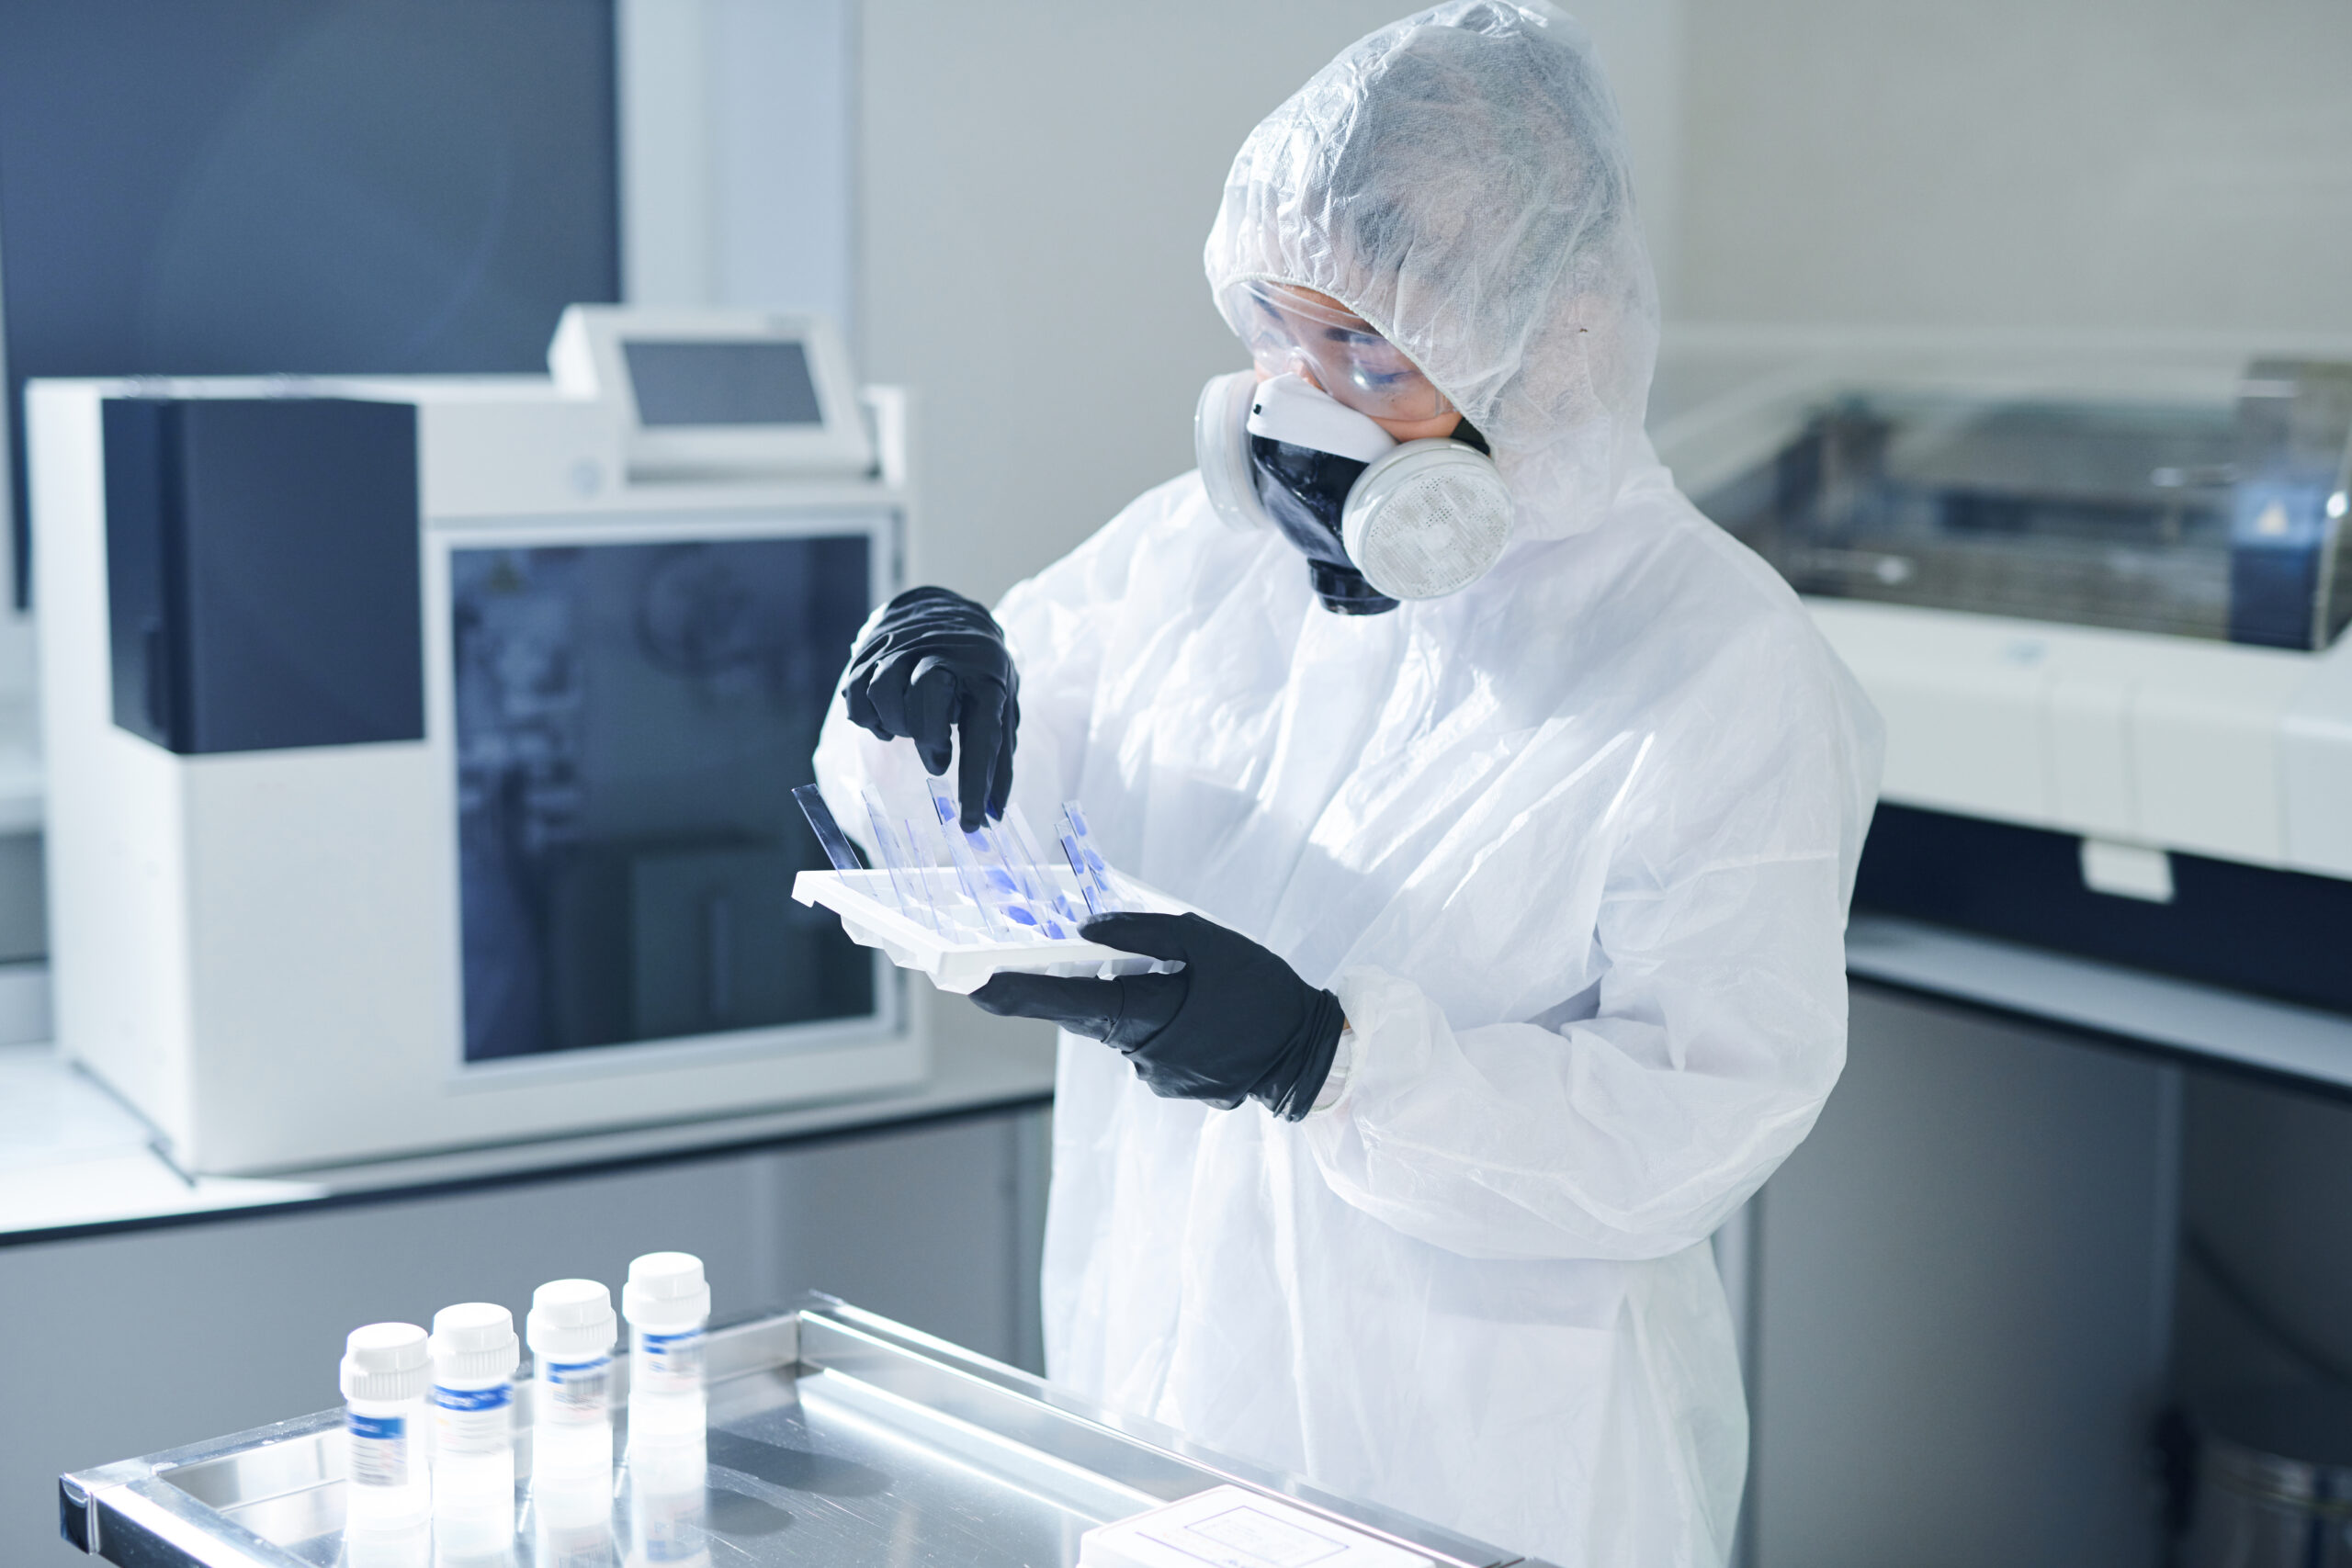 Busy infectious disease scientist in biohazard suit and respiratory mask standing at table with bottles and taking samples of biohazards for research